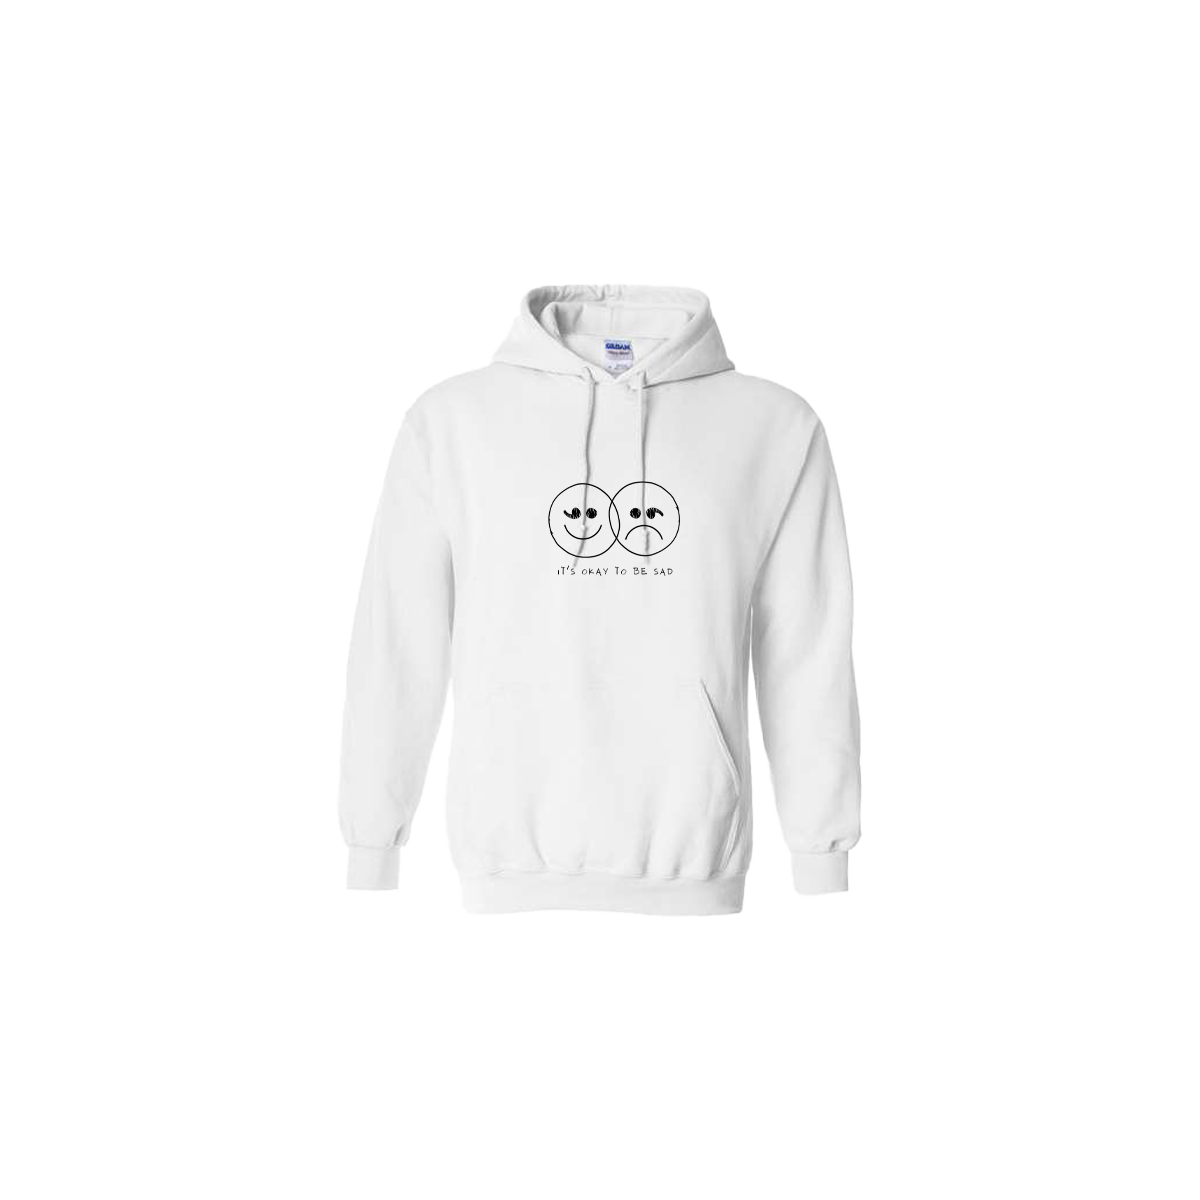 It's Okay to be Sad Double Smiley Face Embroidered White Hoodie - Mental Health Awareness Clothing